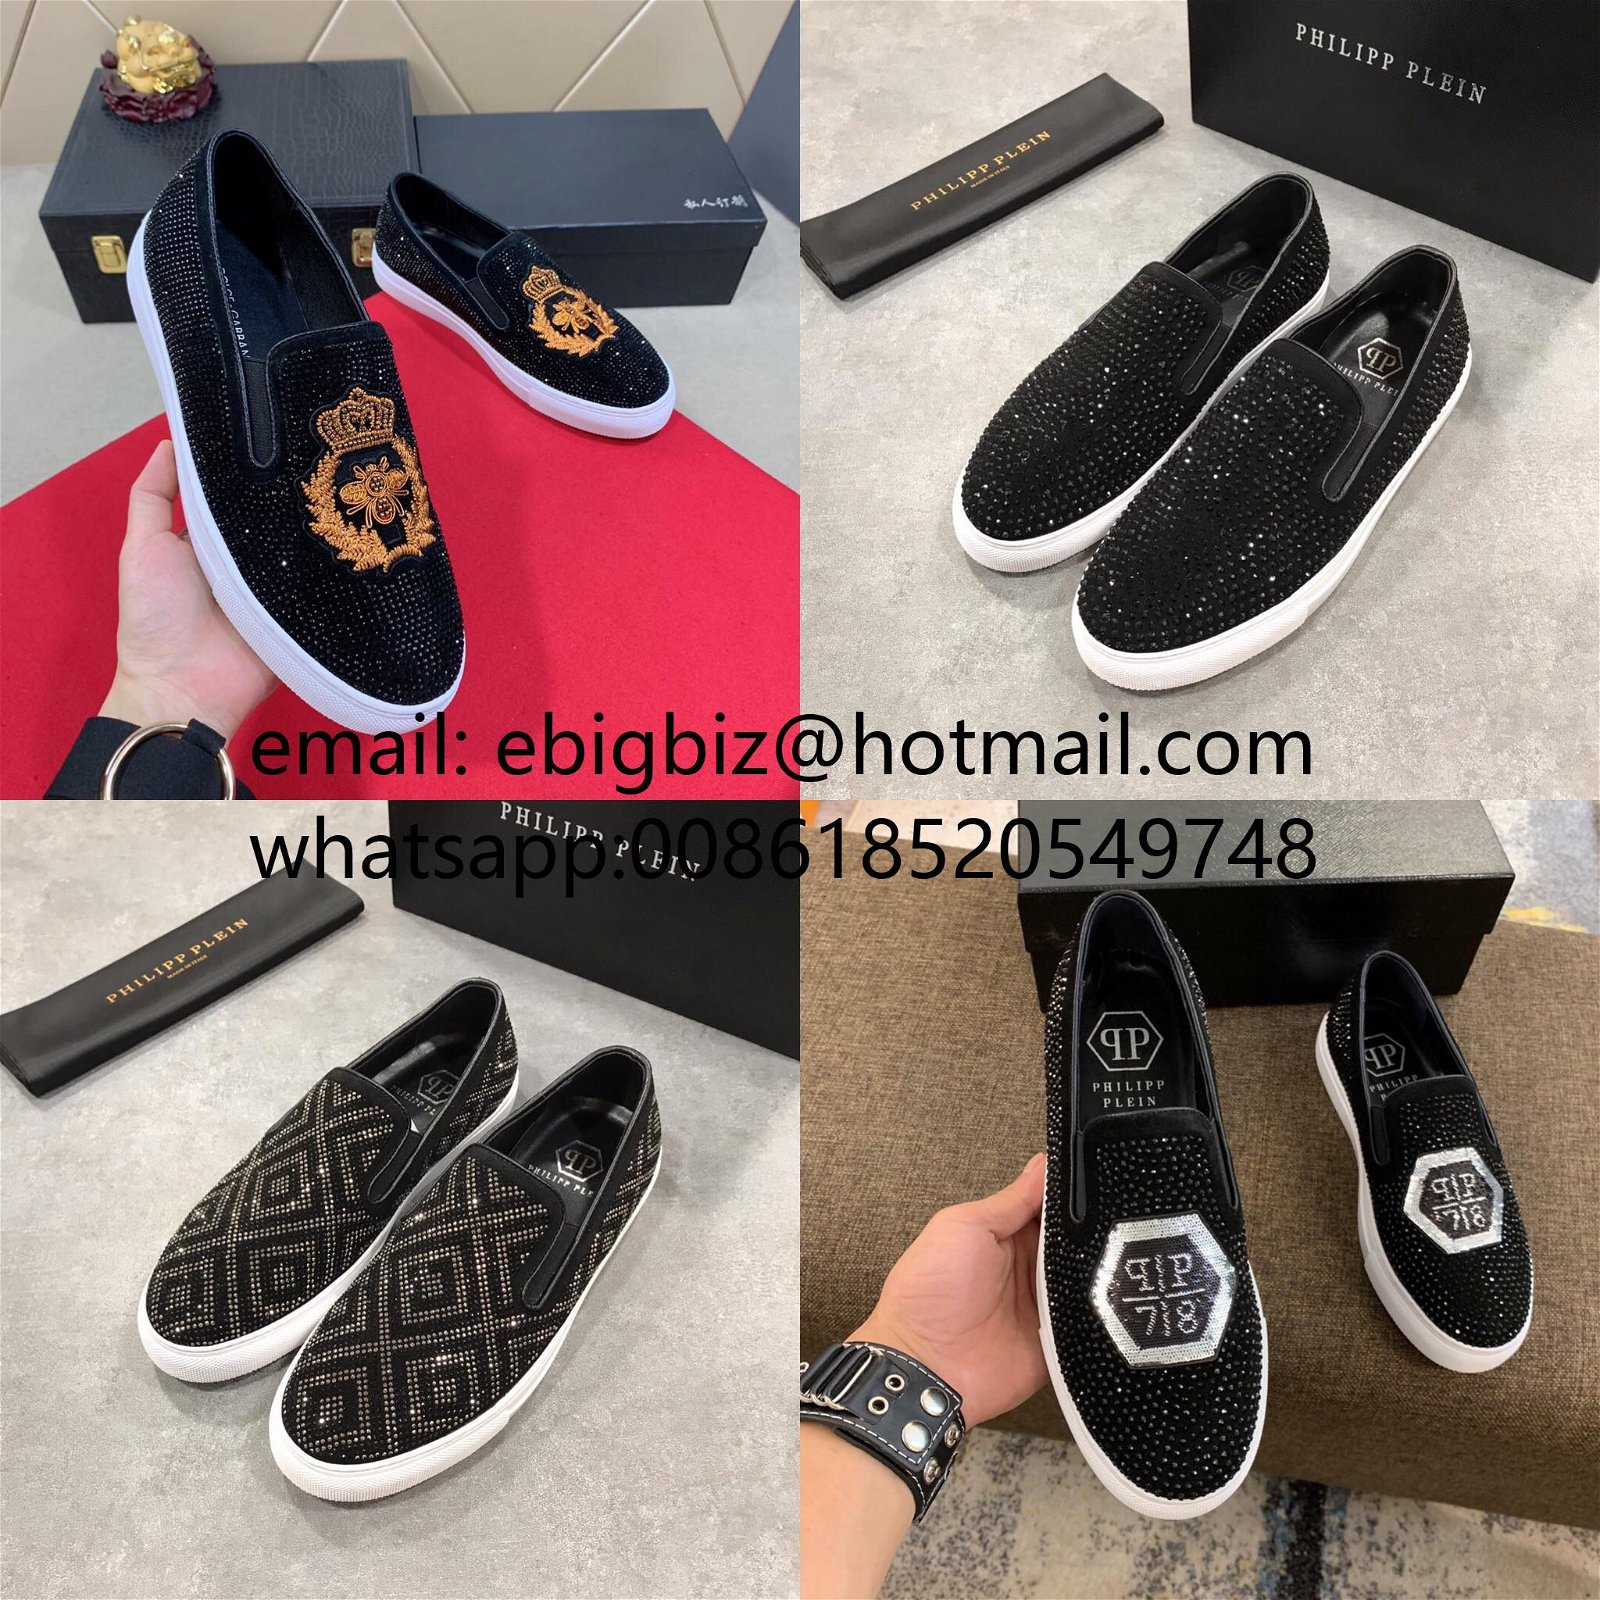 Cheap Philipp Plein shoes men Philipp Plein shoes on sale Philipp Plein  sneakers (China Trading Company) - Men's Shoes - Shoes Products -